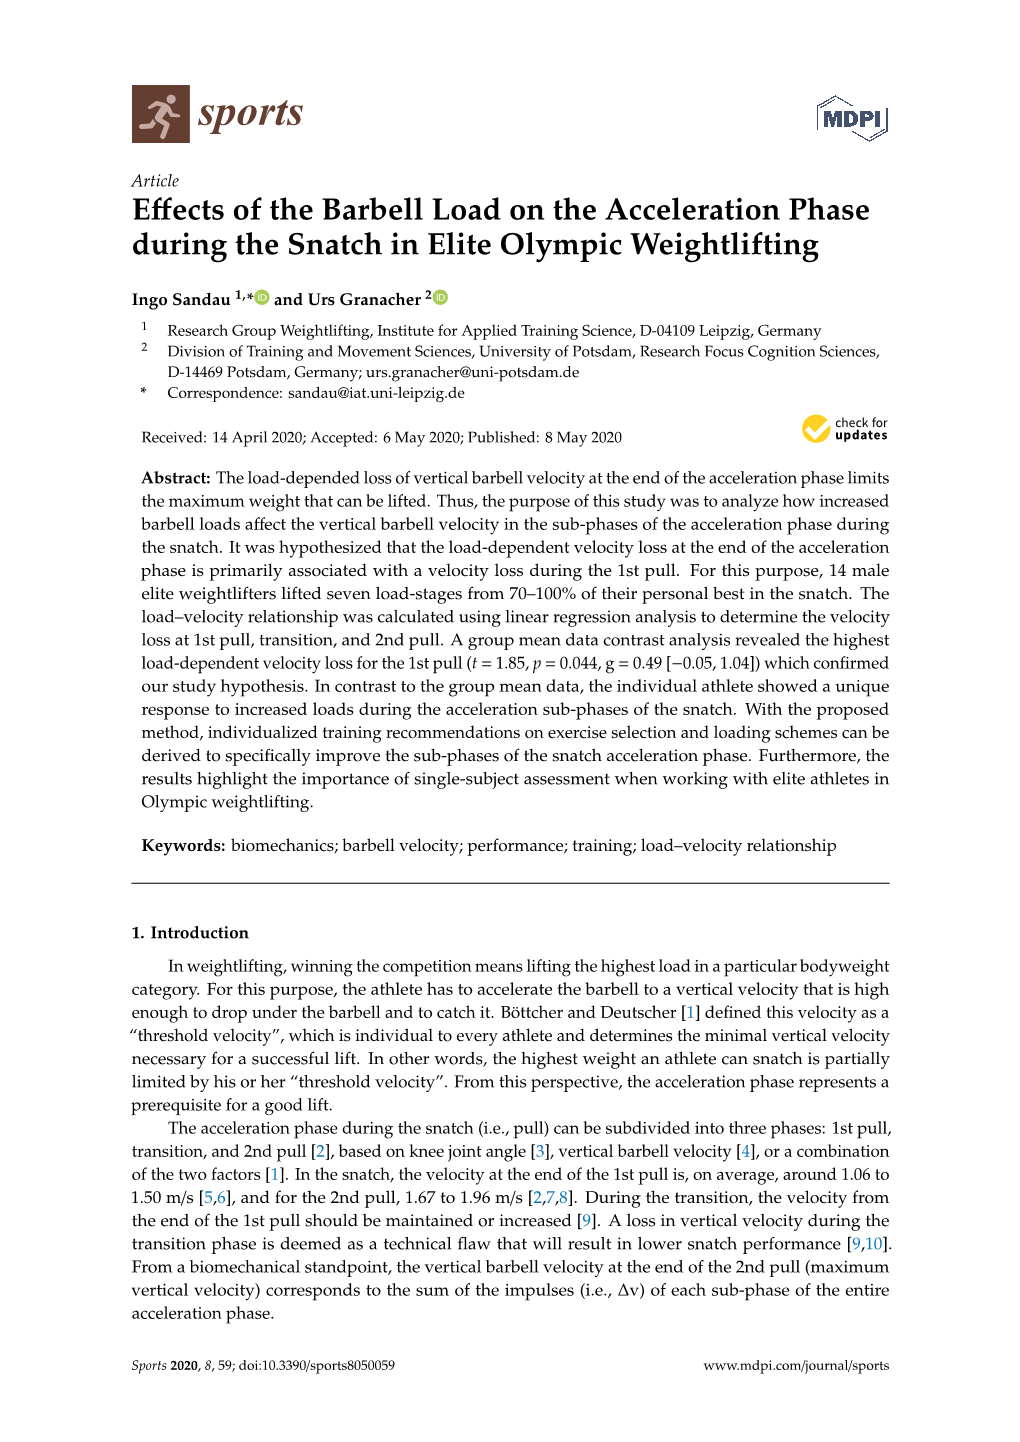 Effects of the Barbell Load on the Acceleration Phase During the Snatch in Elite Olympic Weightlifting